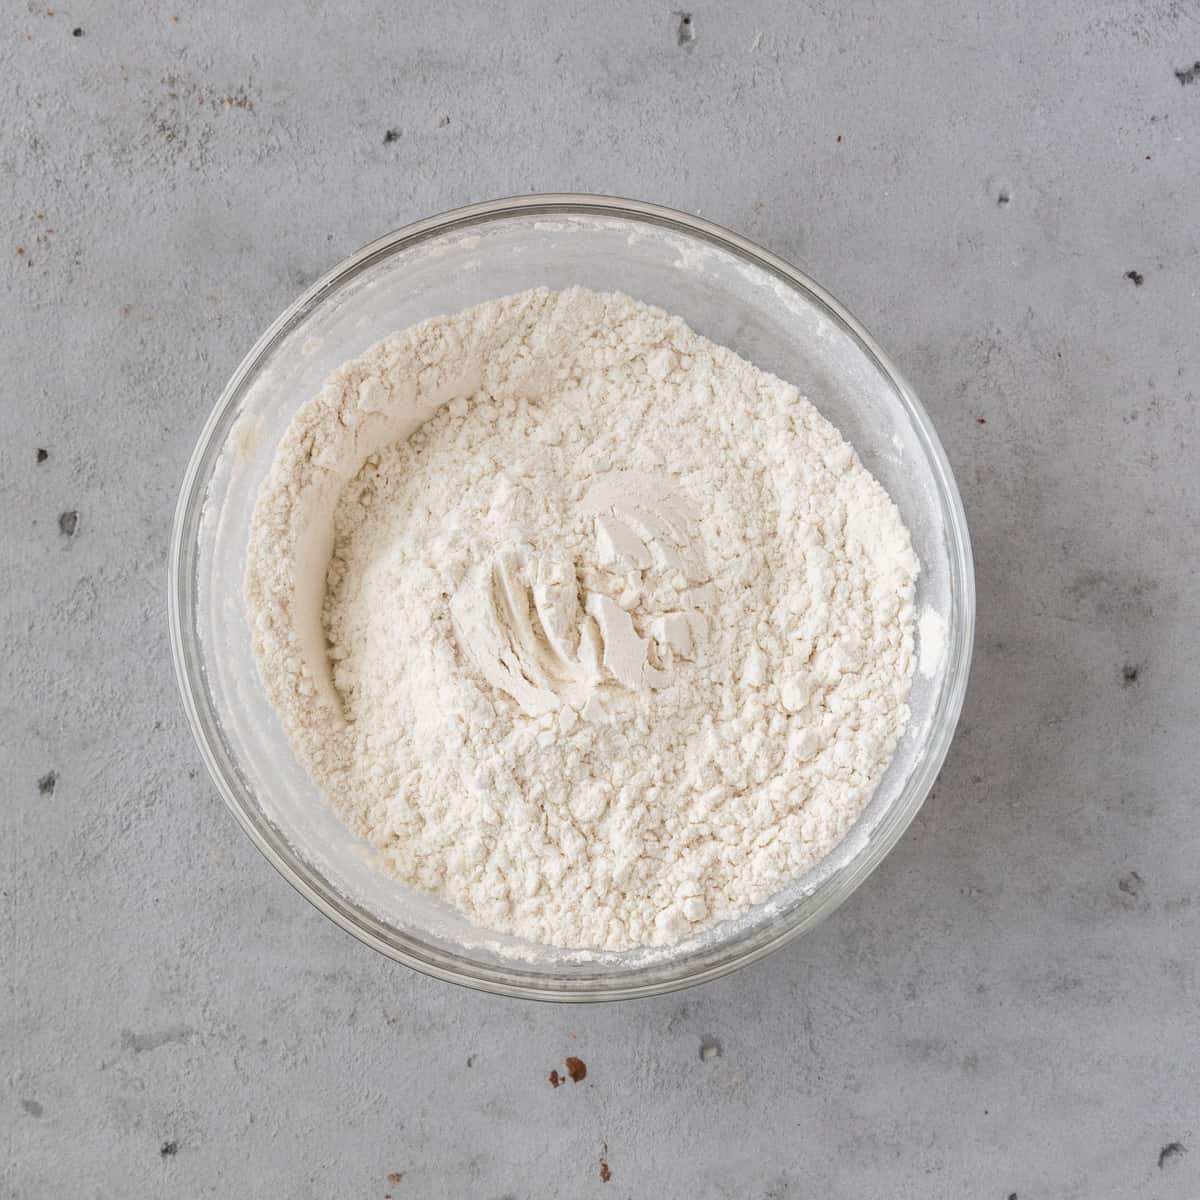 the dry ingredients combined in a glass bowl on grey background